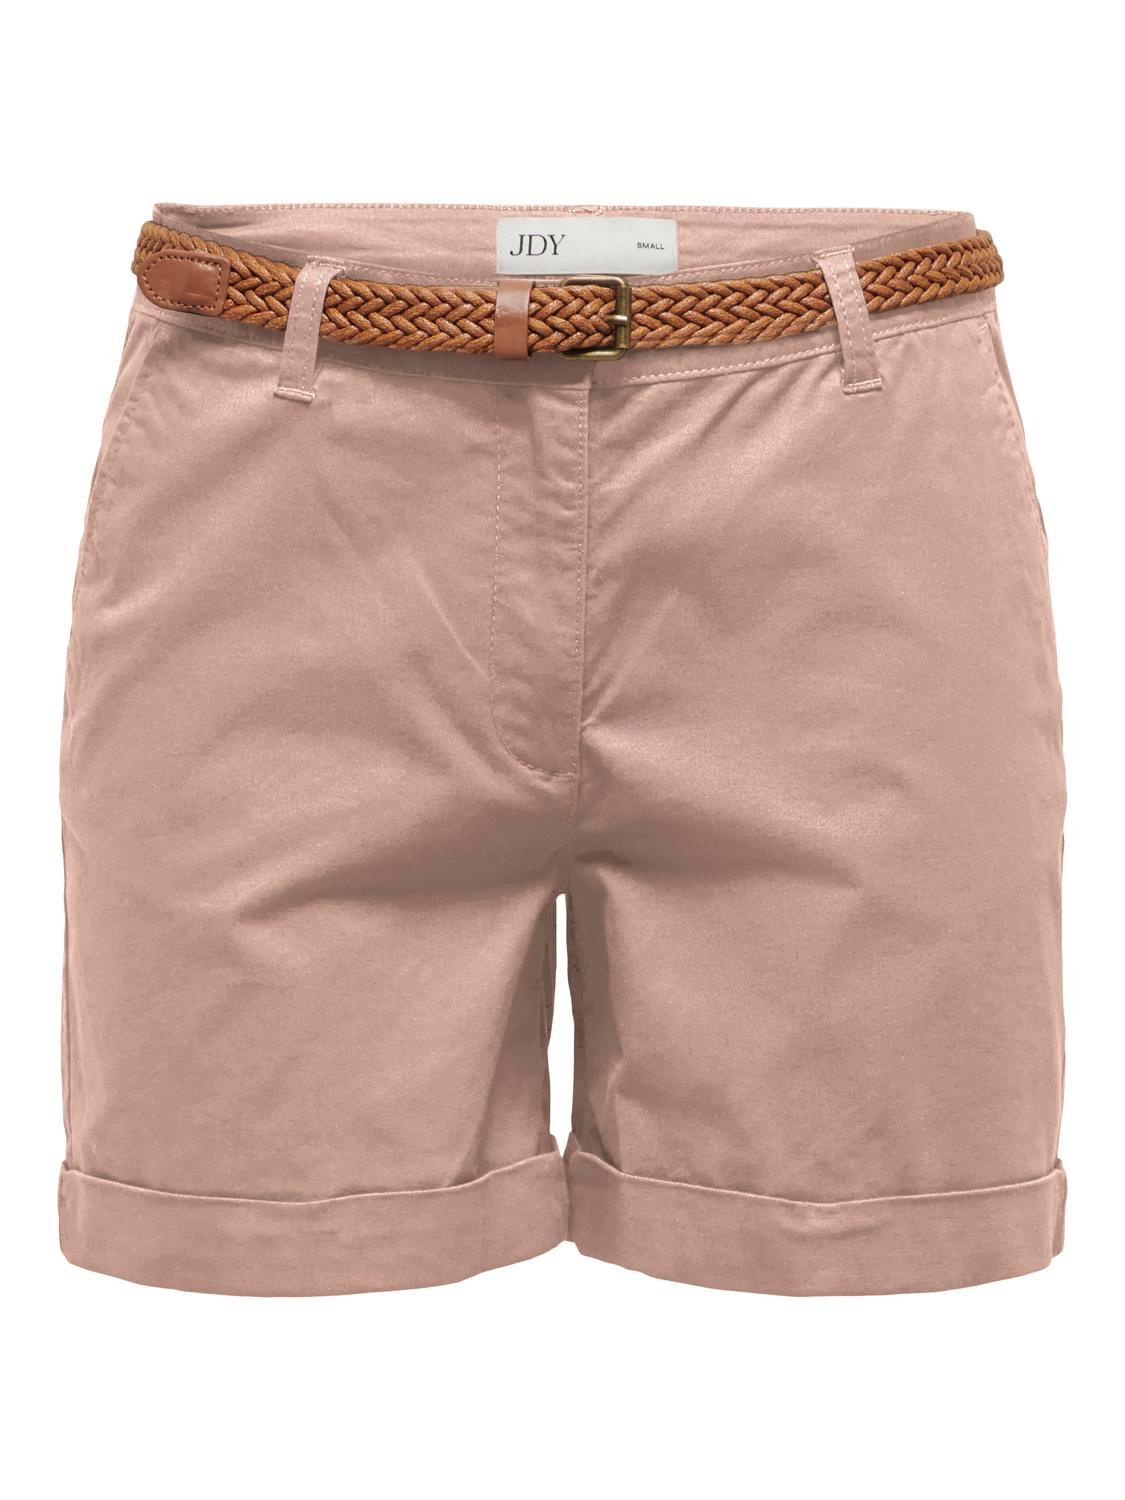 ONLY Shorts Regular Fit Taille moyenne Ourlets repliés -Rugby Tan - 15324743